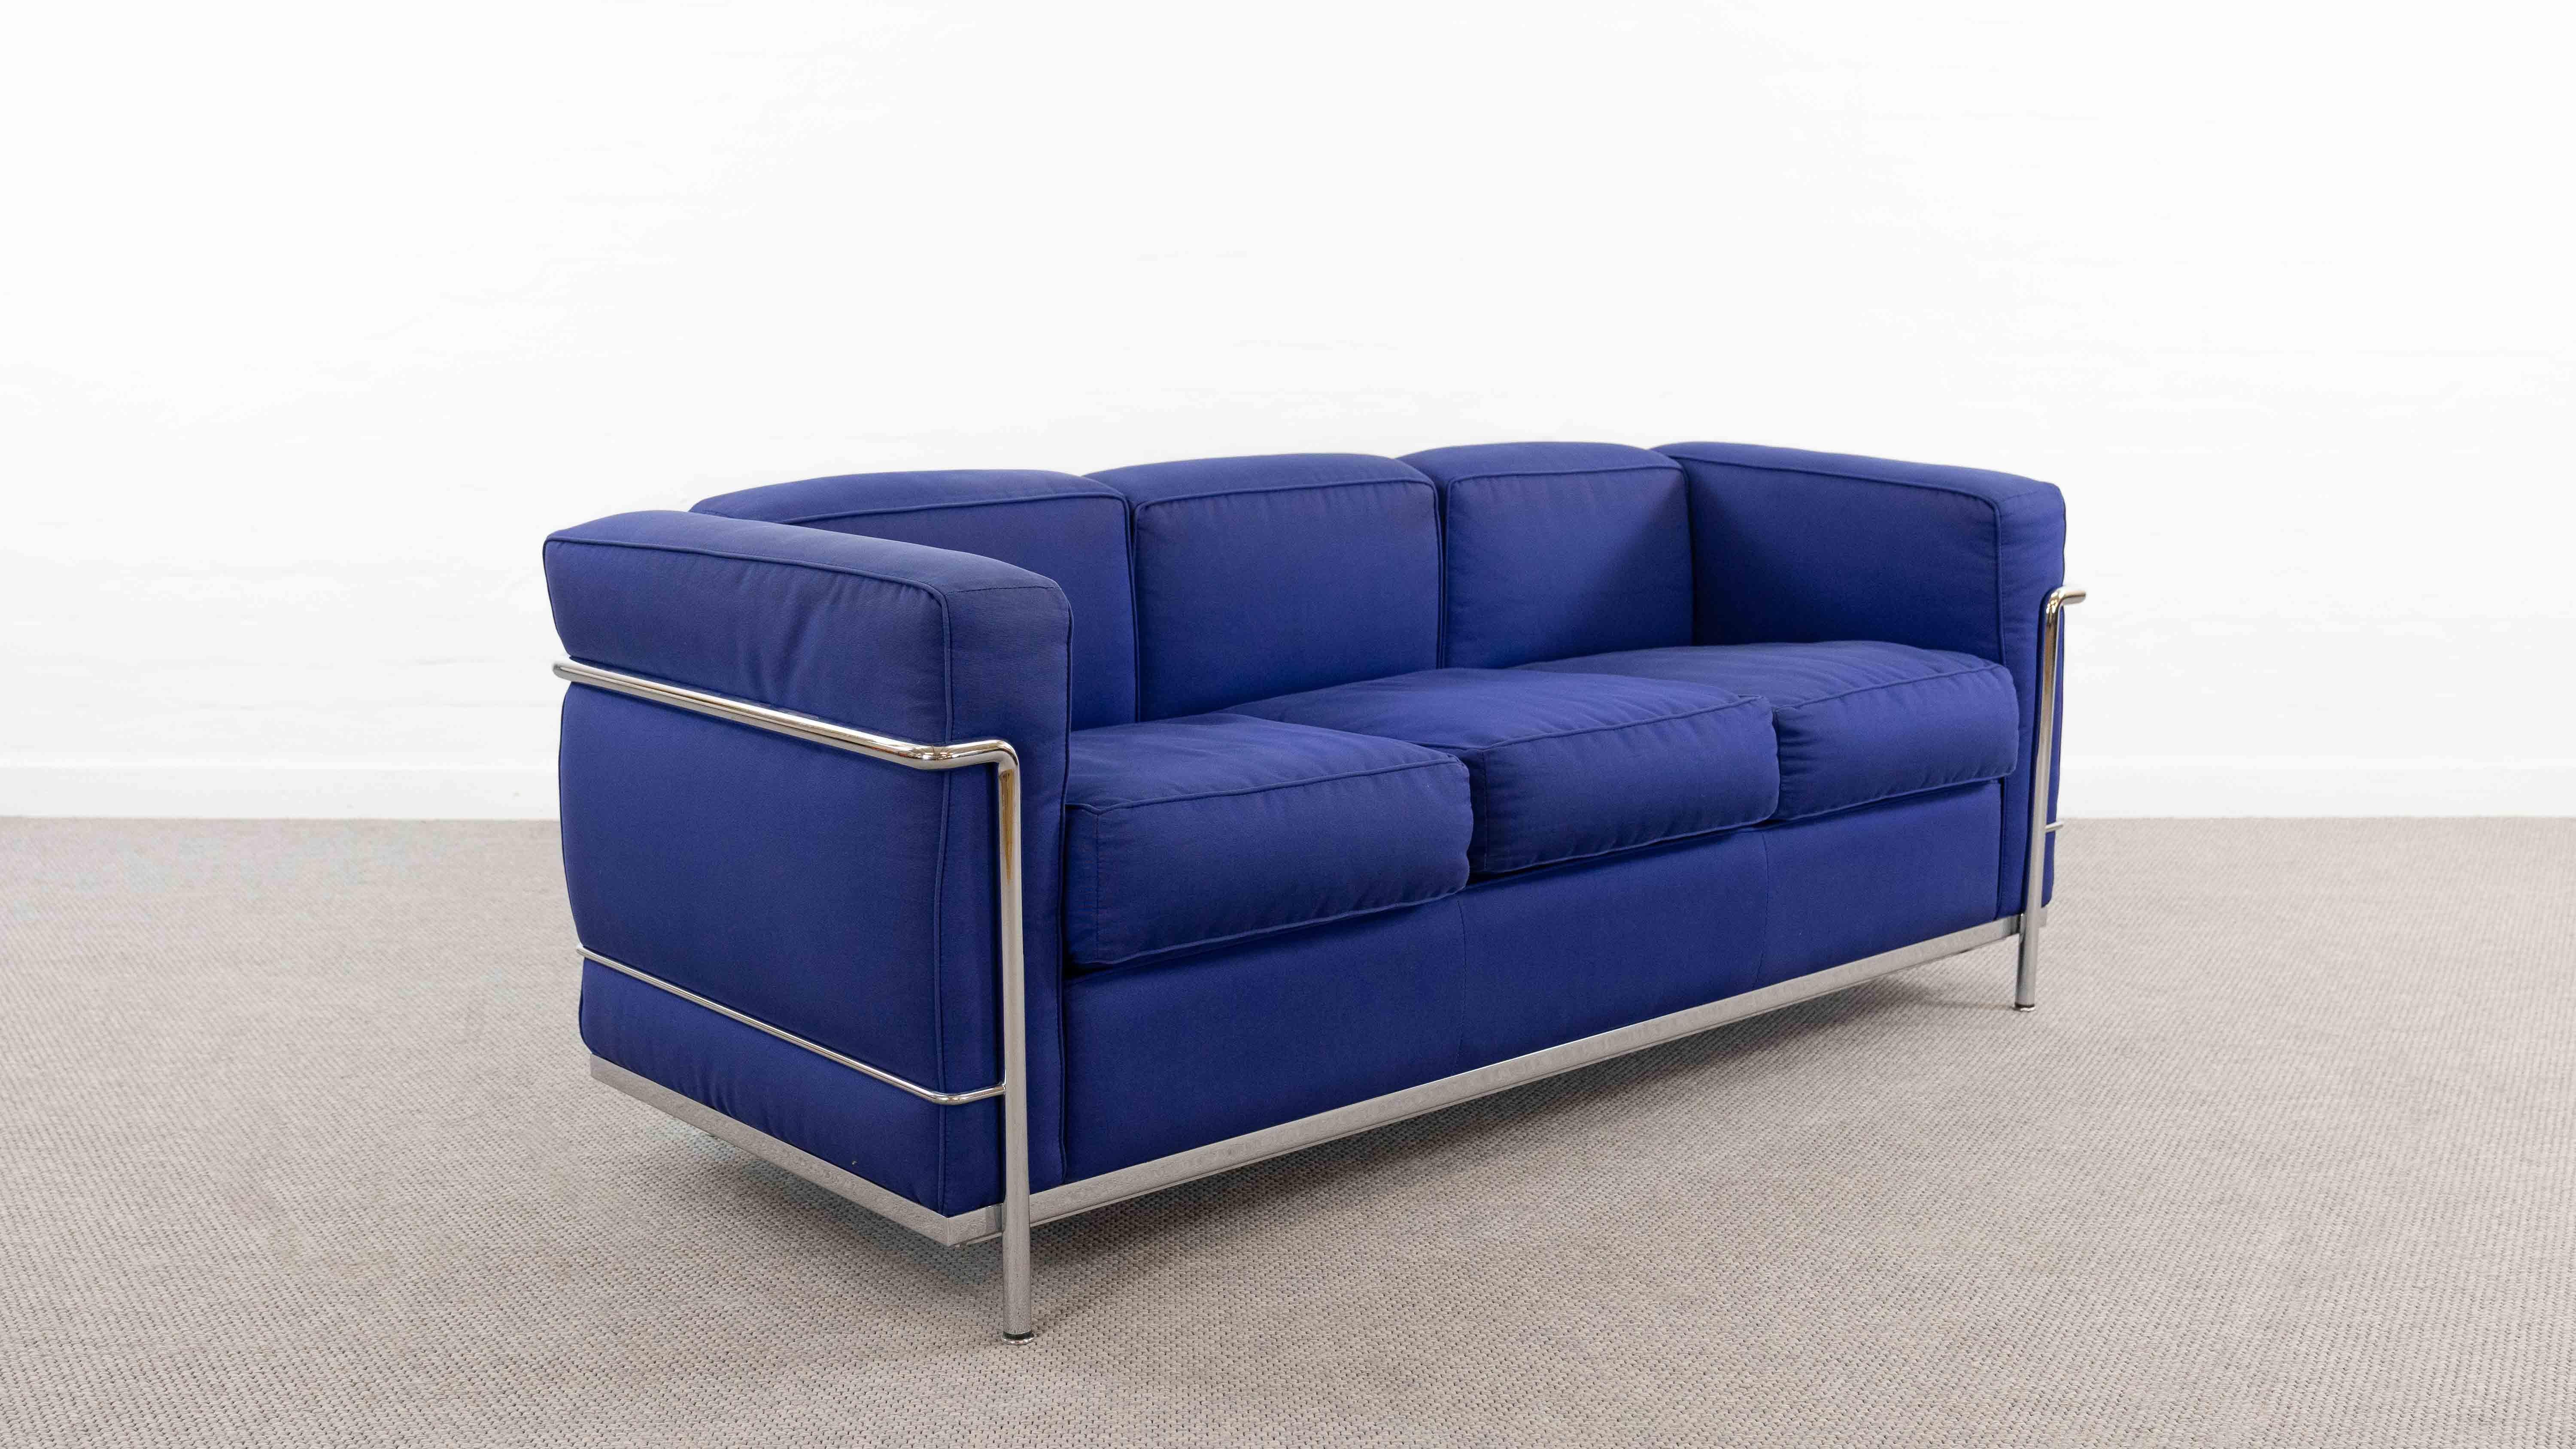 Modern Cassina Lc2 3seat Sofa by Charlotte Perriand and Le Corbusier in Blue Fabrics